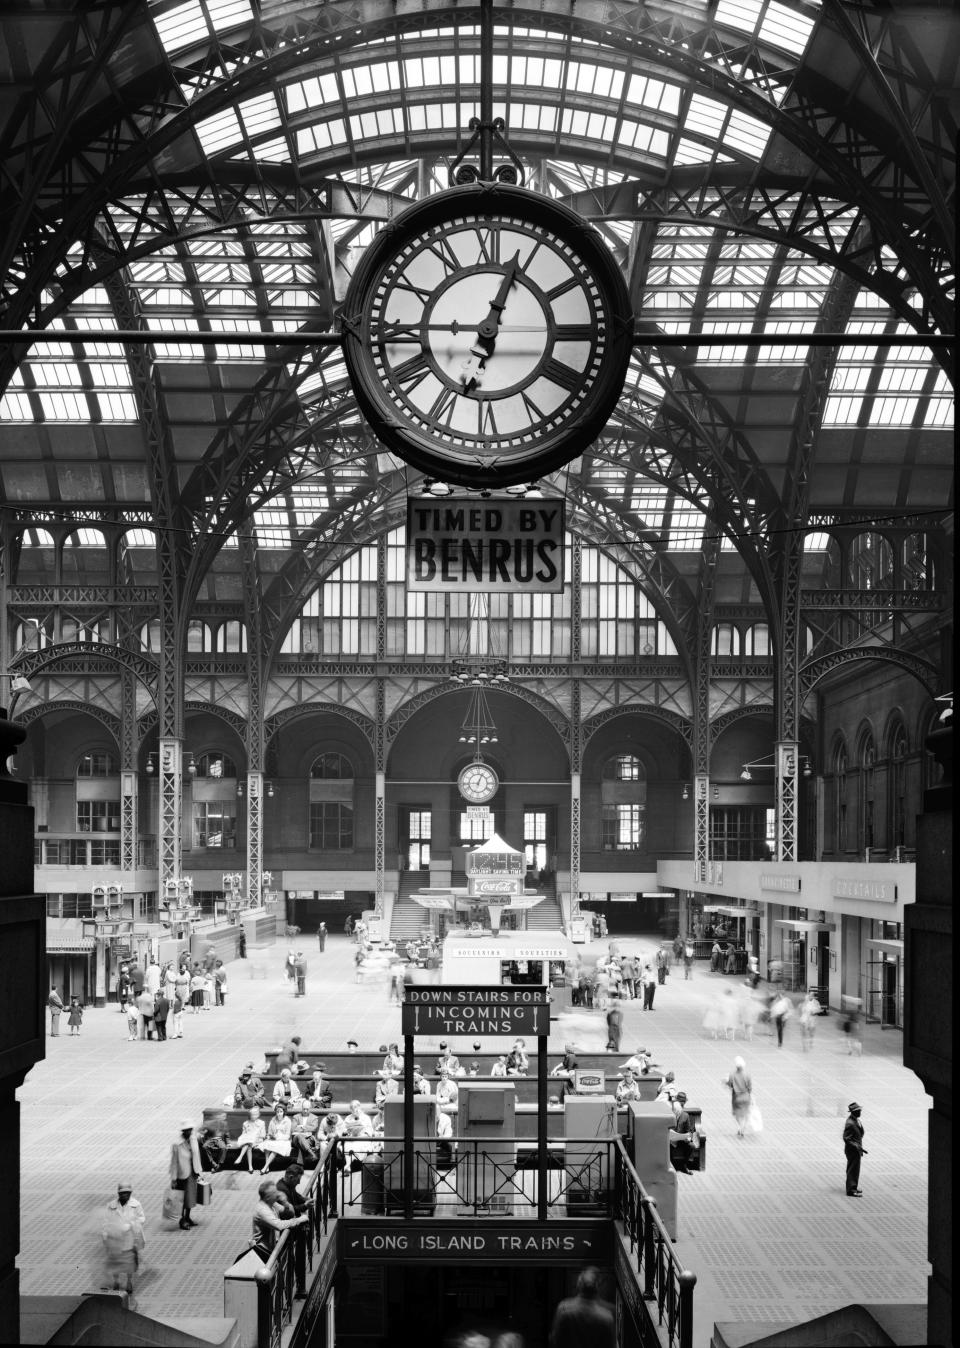 FILE - This April 24, 1962 file photo provided by theLibrary of Congress shows the main concourse of the original Pennsylvania Station in New York, photographed as part of the federal Historic American Buildings Survey. The original station, built a century ago as a Beaux Arts masterpiece of soaring beauty, classical columns and natural light, was modeled after the monuments of ancient Rome. It was torn down in 1963 and replaced with the current, smaller Penn Station, notable for its blandness - topped with the familiar circular Madison Square Garden, which was among the first buildings of its kind to be built above the platforms of an active railroad station. (AP Photo/Cervin Robinson, Library of Congress, File)